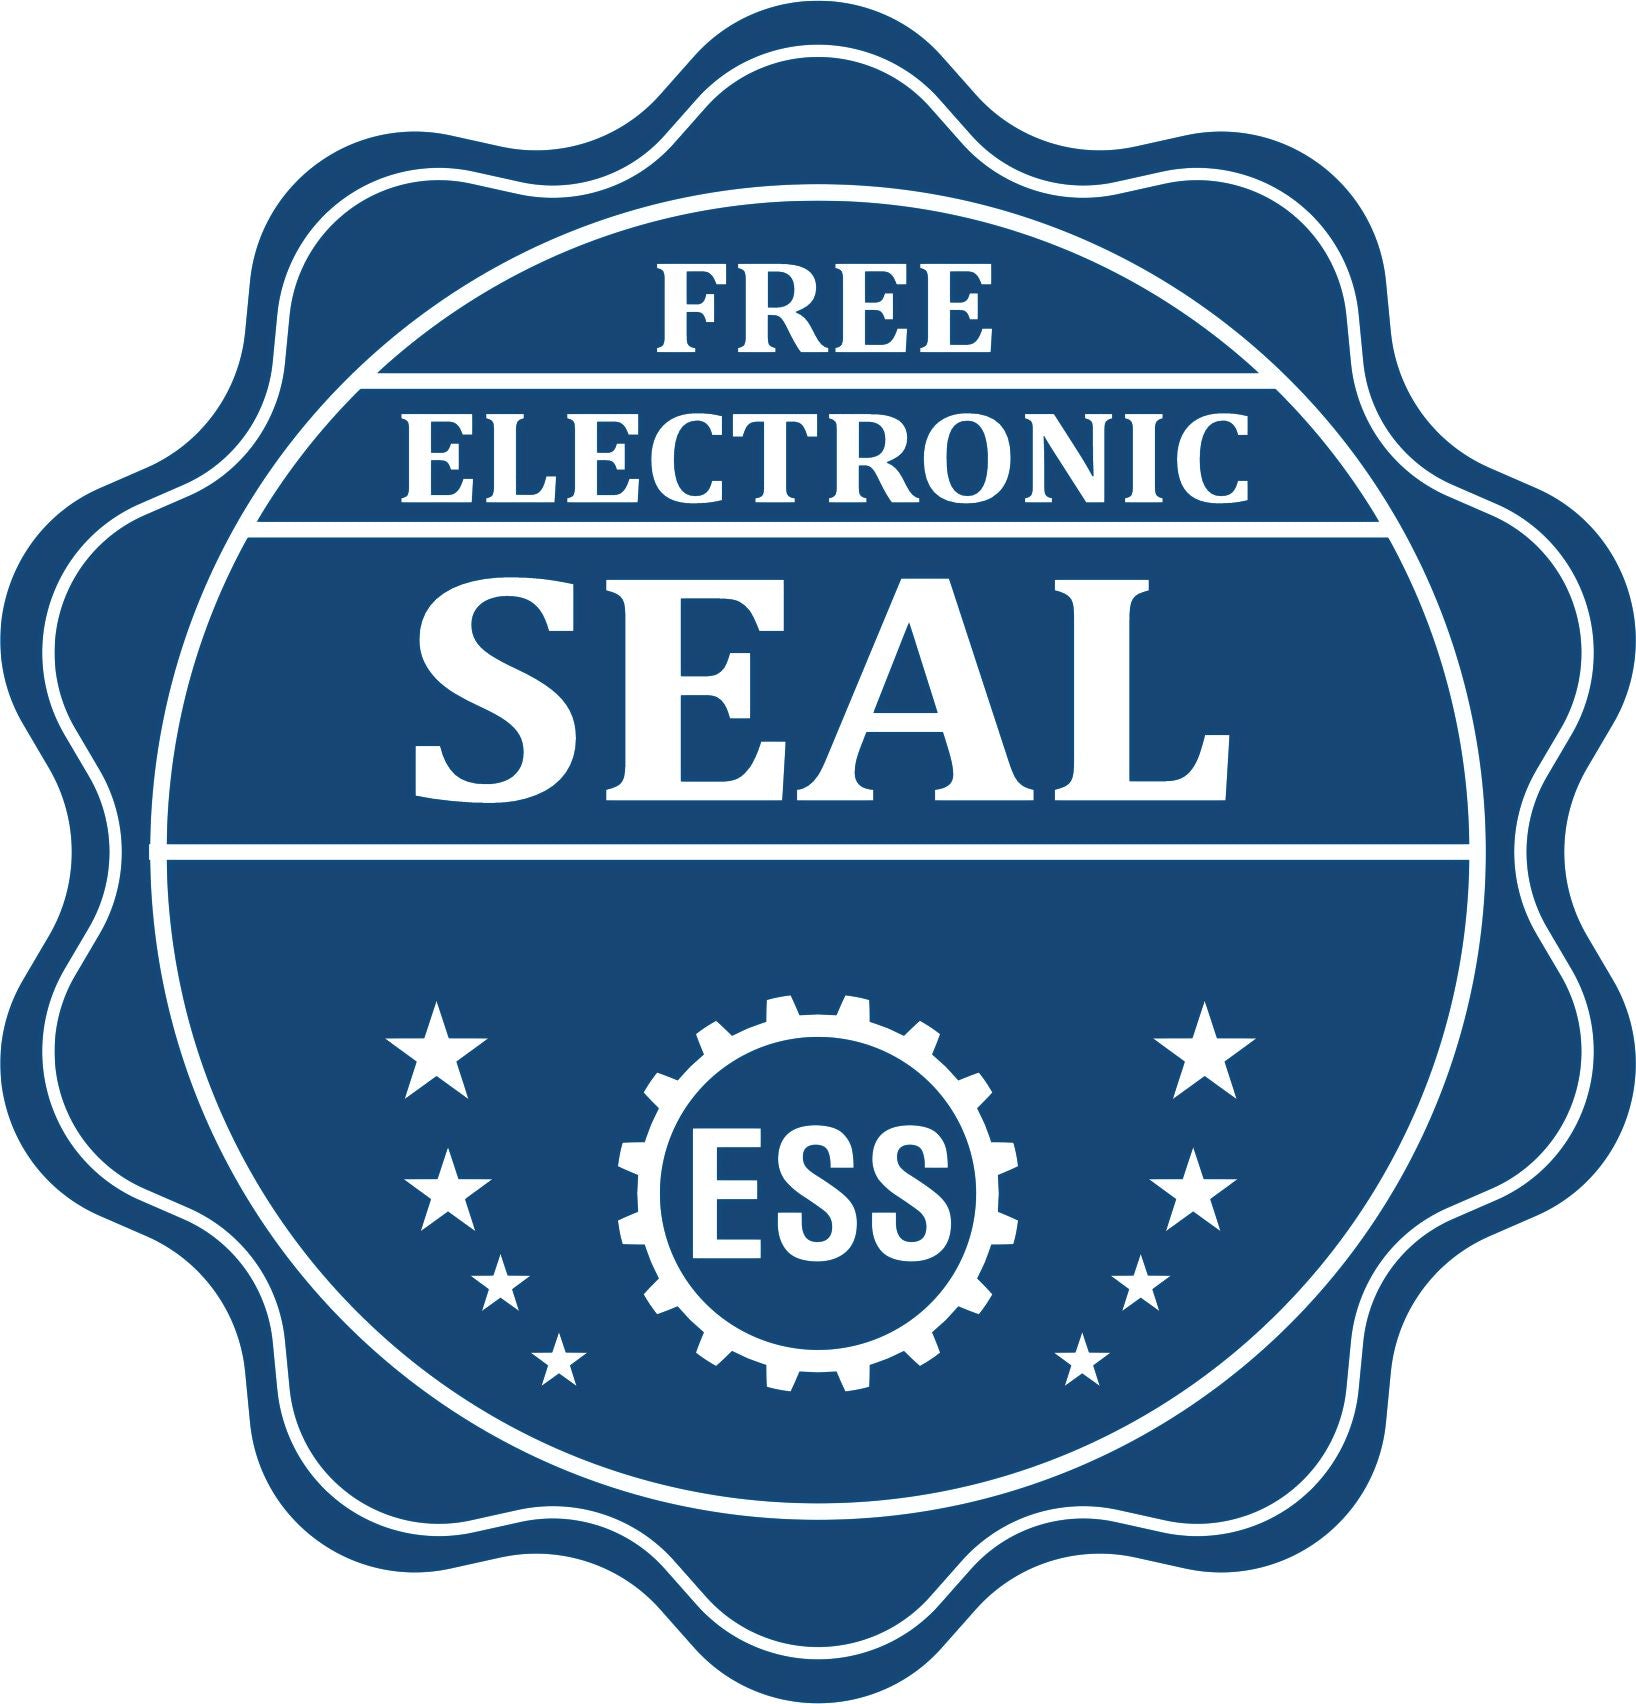 A badge showing a free electronic seal for the Gift Nebraska Landscape Architect Seal with stars and the ESS gear on the emblem.